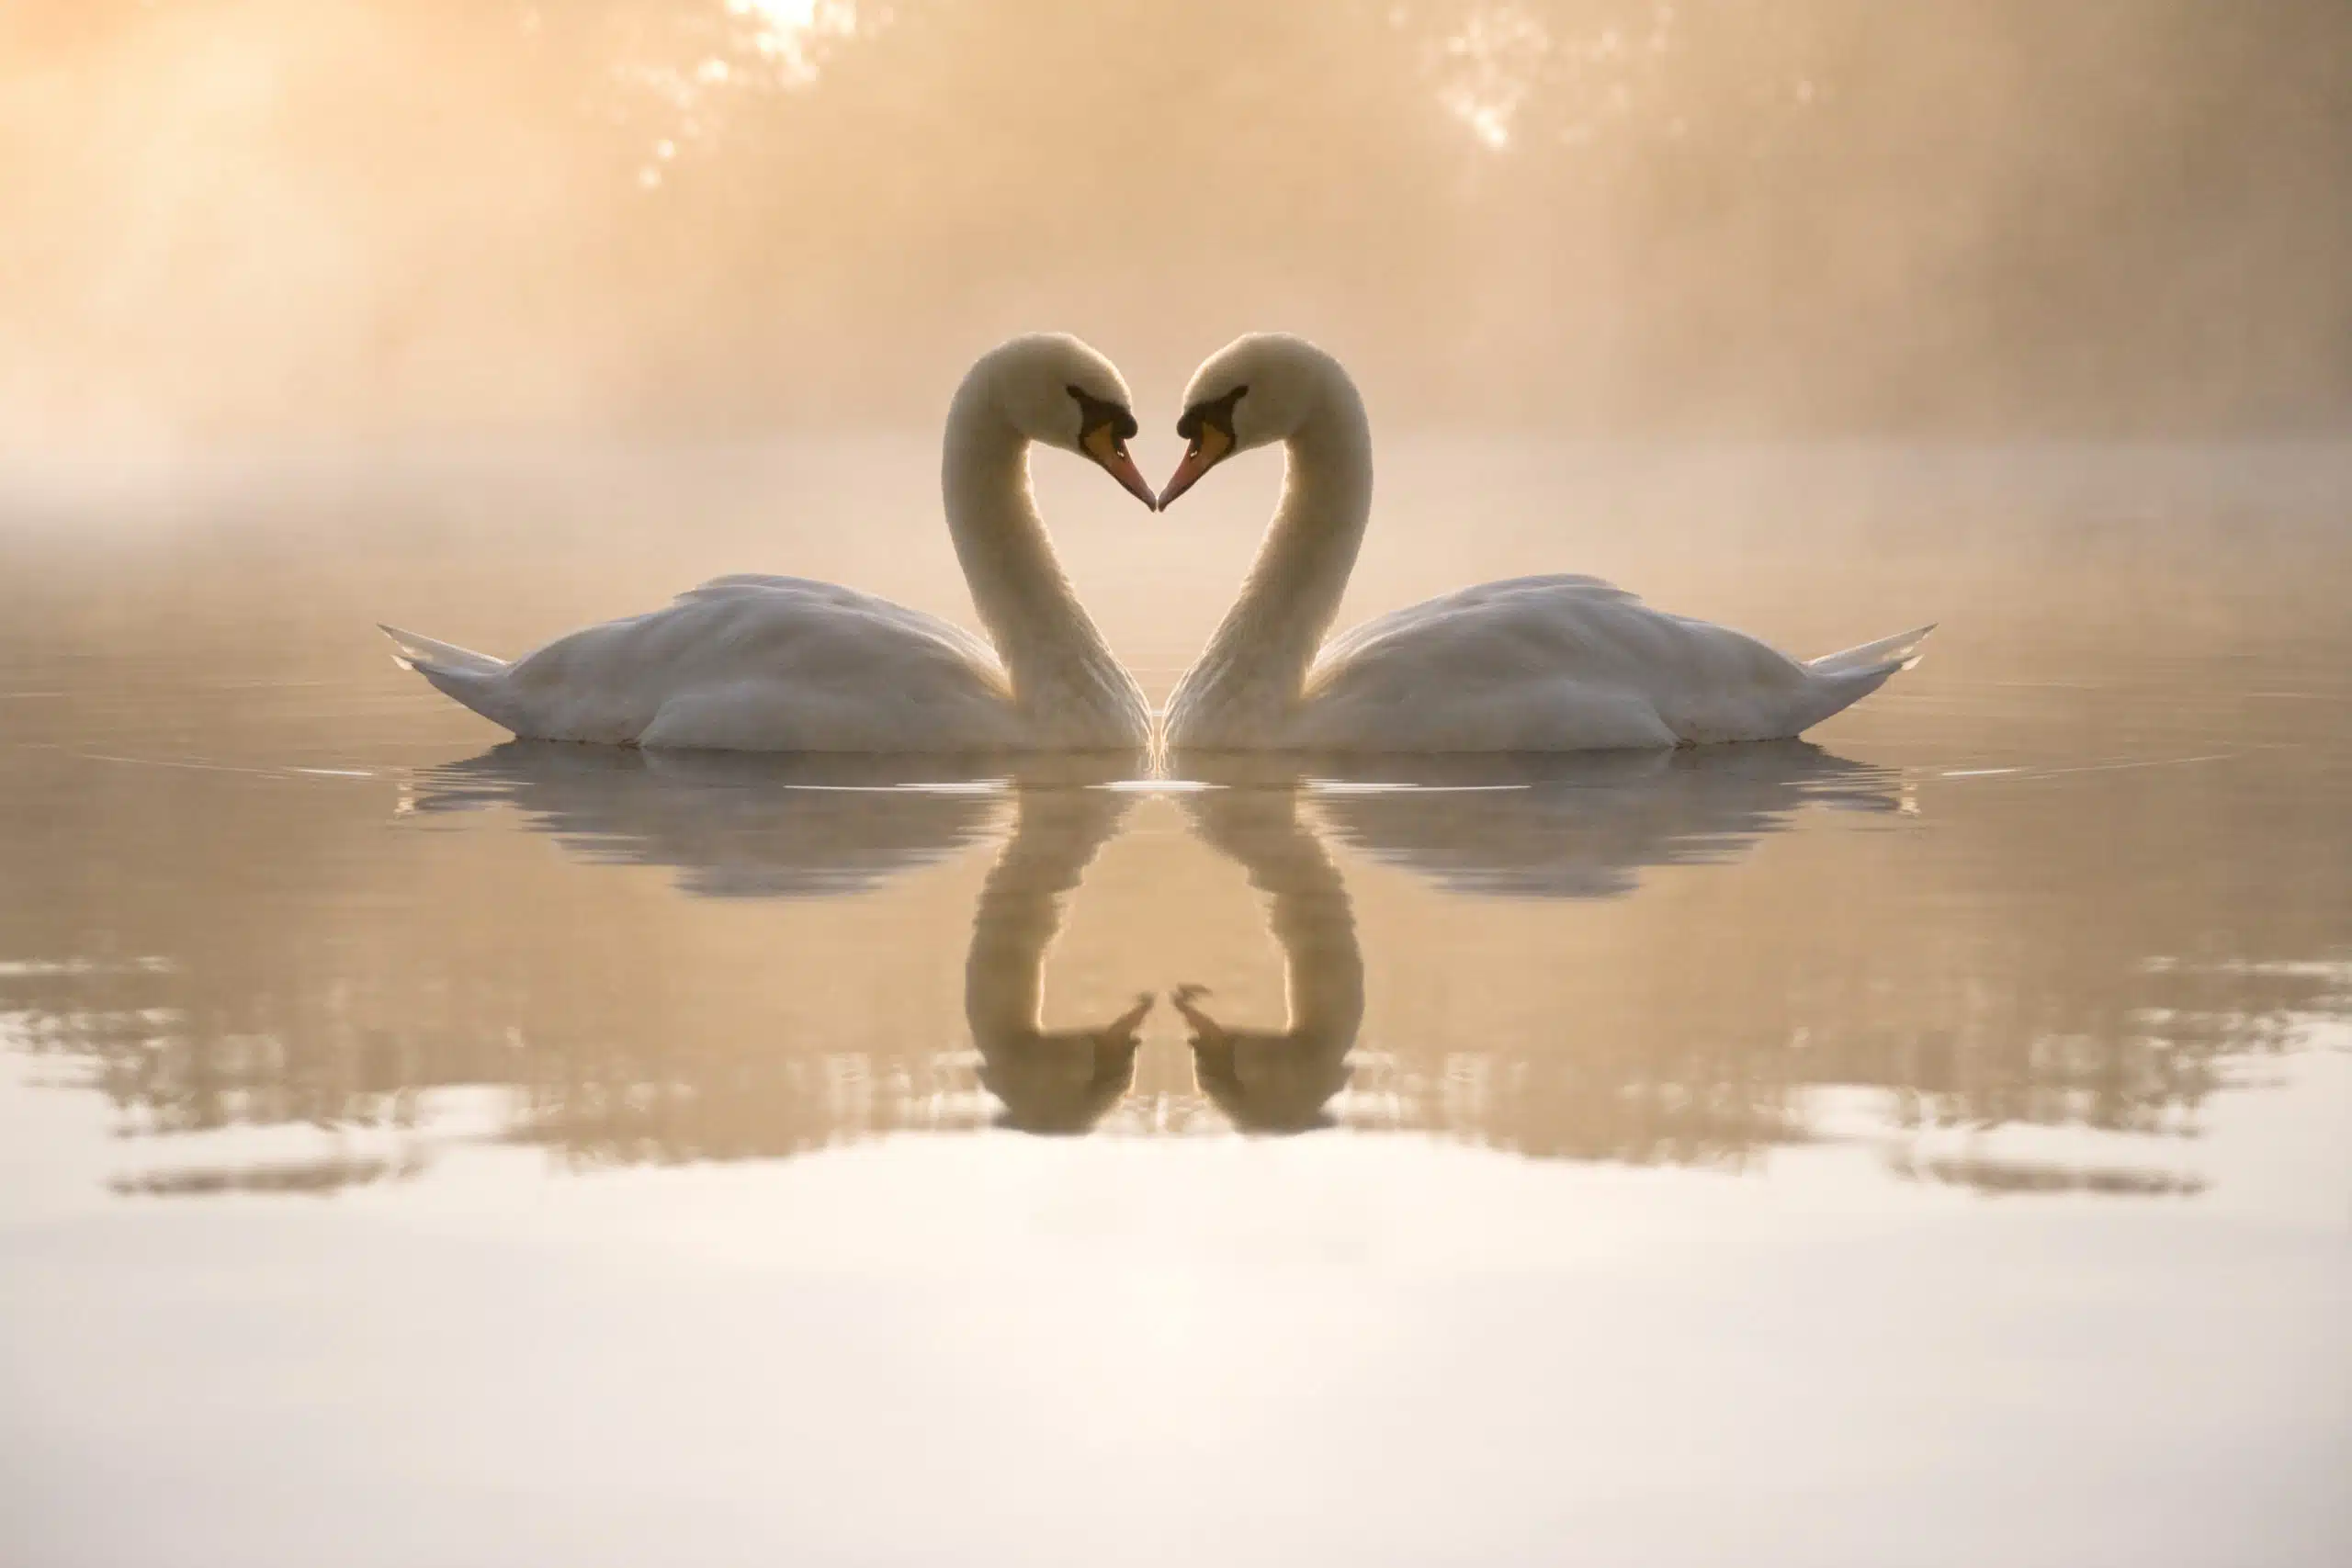 Swans forming love heart in the lake